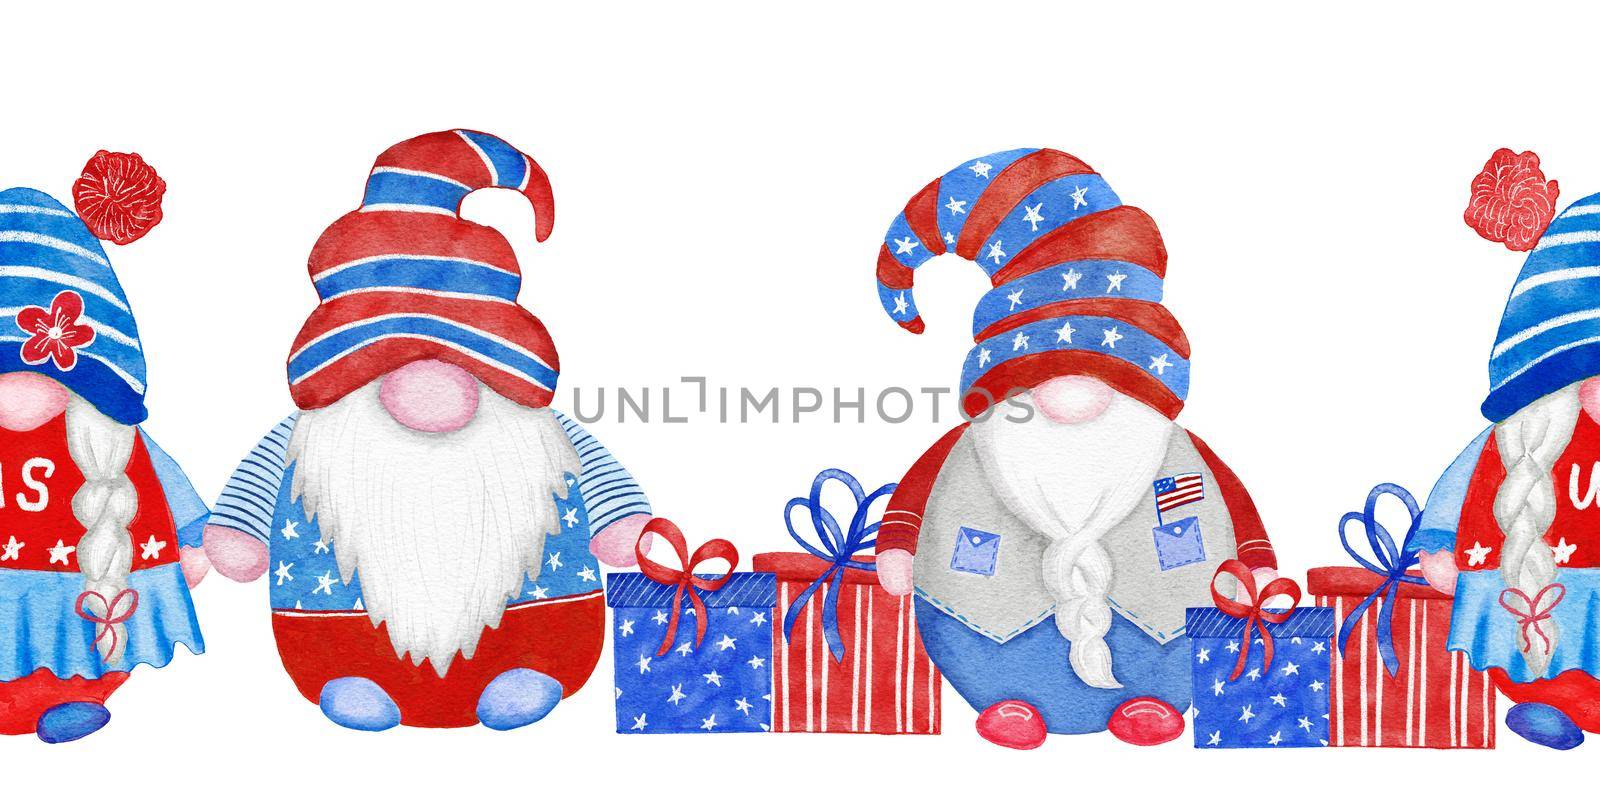 Watercolor seamless hand drawn horizontal border with 4th of July gnomes, Forth of july patriotic American design with nordic gnomes in blue red white hats balloons gifts. US celebration print. by Lagmar